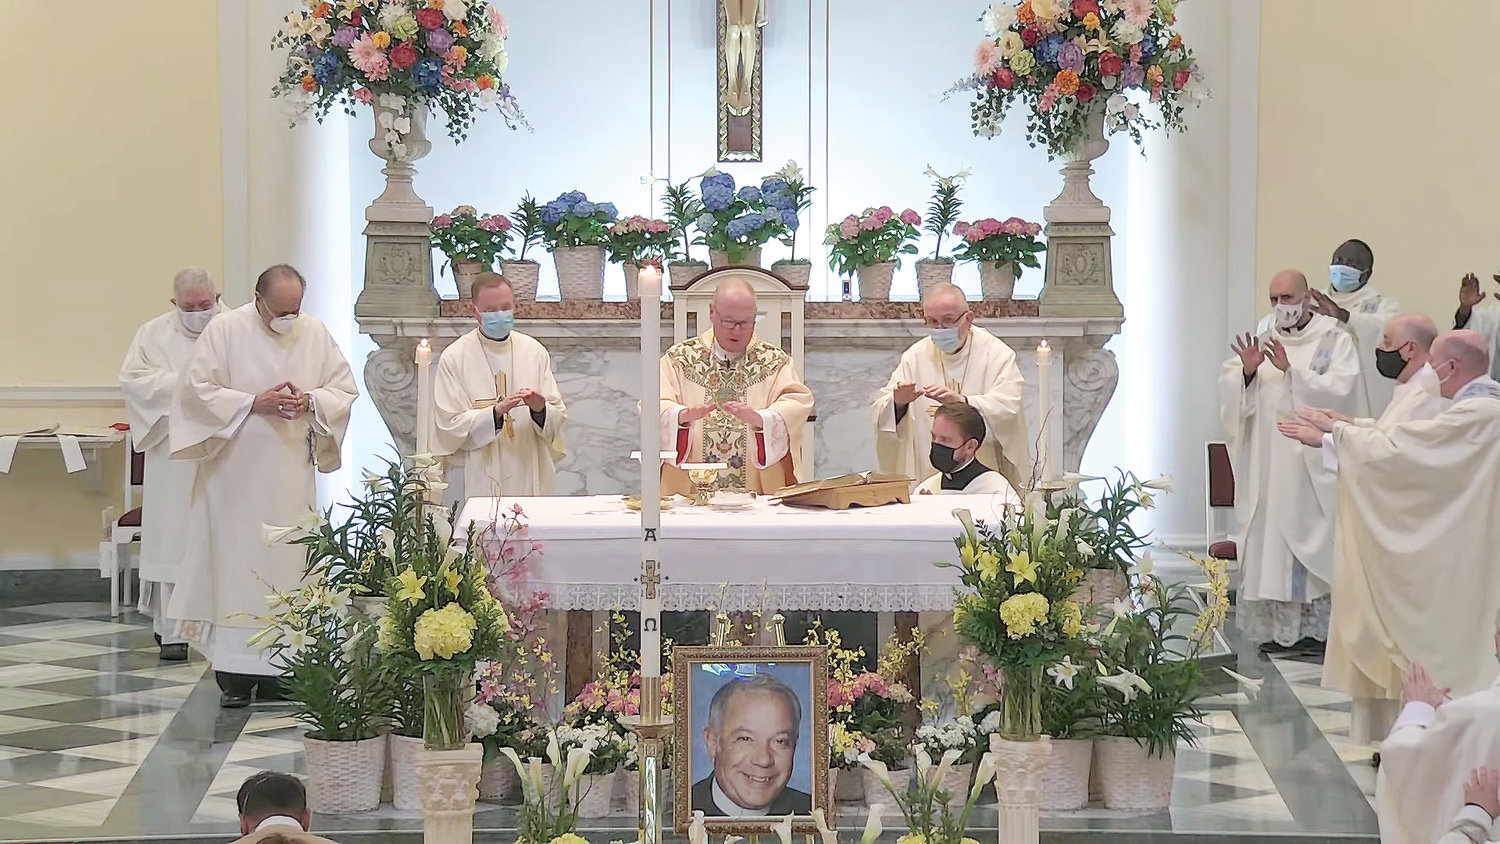 A picture of the late Msgr. Richard Guastella graces the sanctuary of St. Clare Church on Staten Island at a Memorial Mass Cardinal Dolan celebrated April 9. To the left of the cardinal is Auxiliary Bishop Edmund Whalen, and at the cardinal’s right is Retired Auxiliary Bishop John O’Hara. Msgr. Guastella served as pastor of St. Clare’s from 2008 until his death last year. He was also pastor of Holy Rosary parish on Staten Island, 1987-2008.